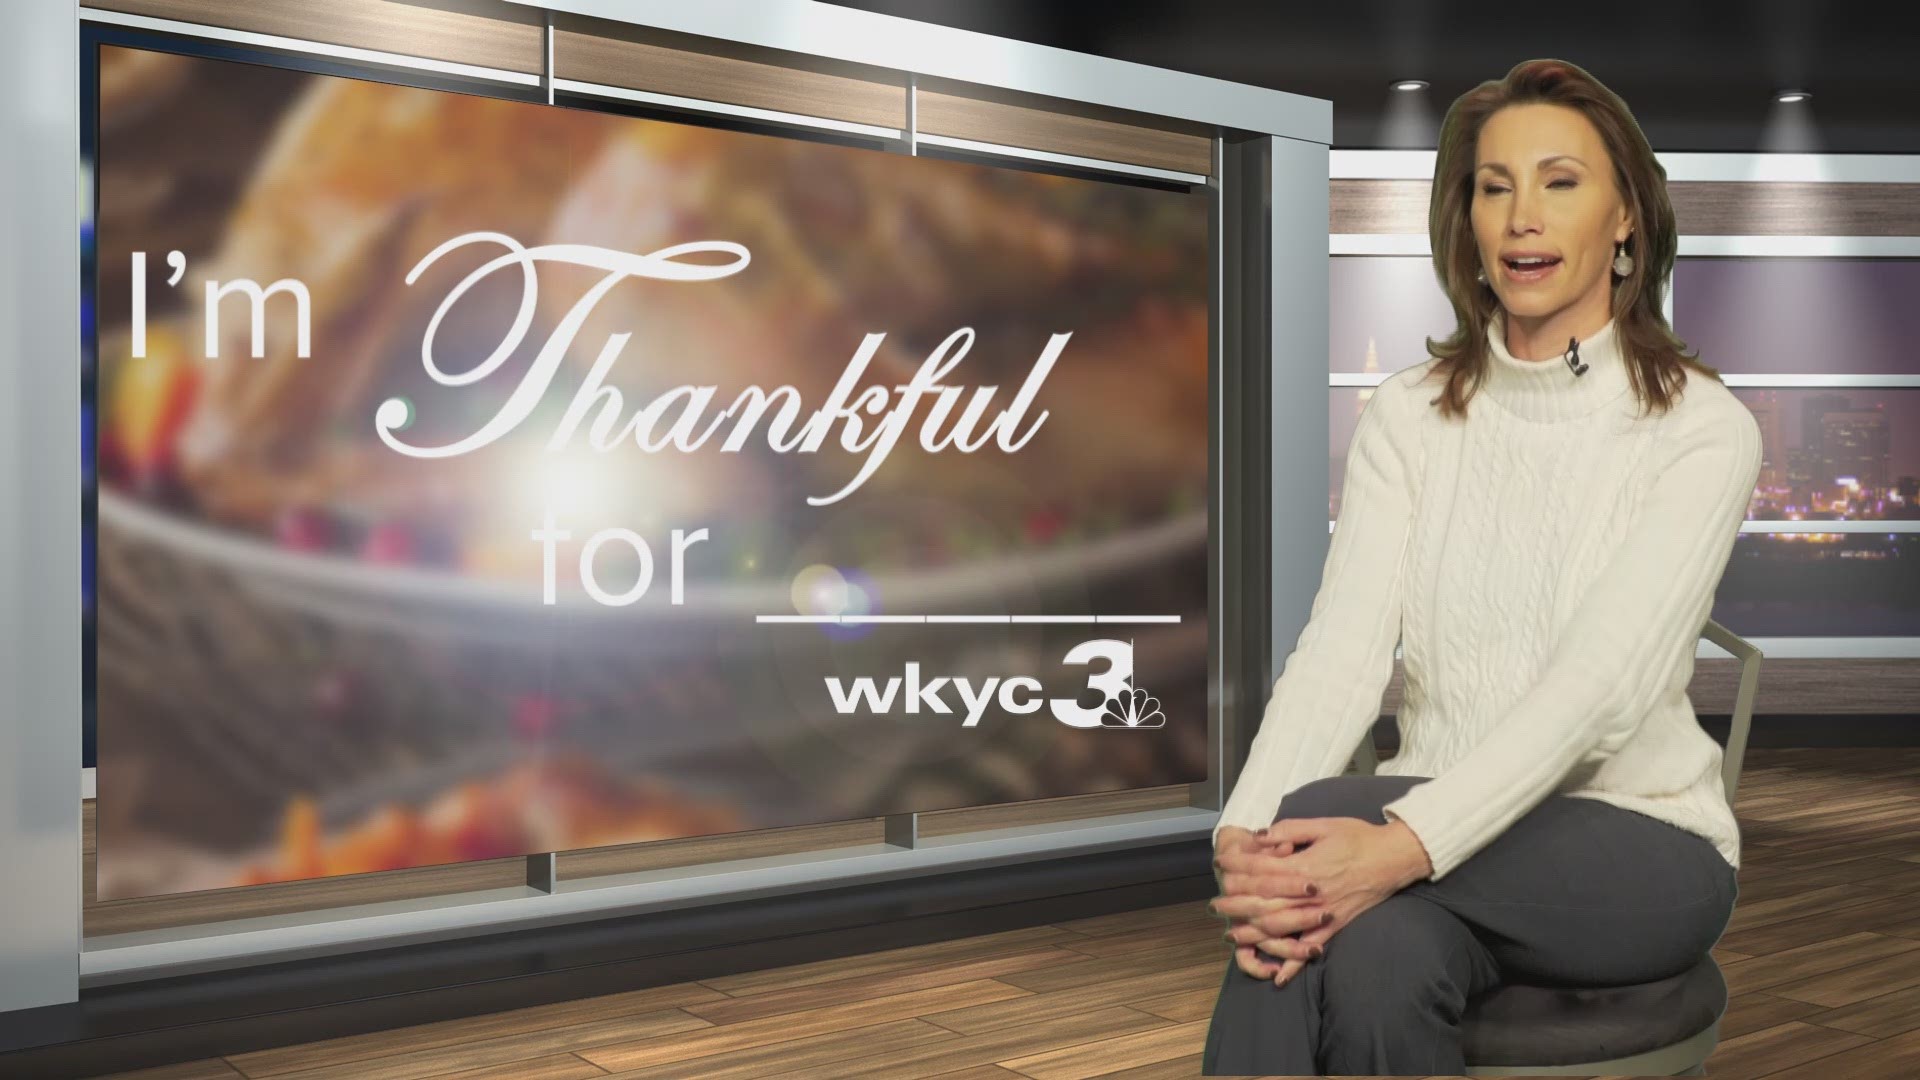 Why we're thankful: WKYC's Betsy Kling